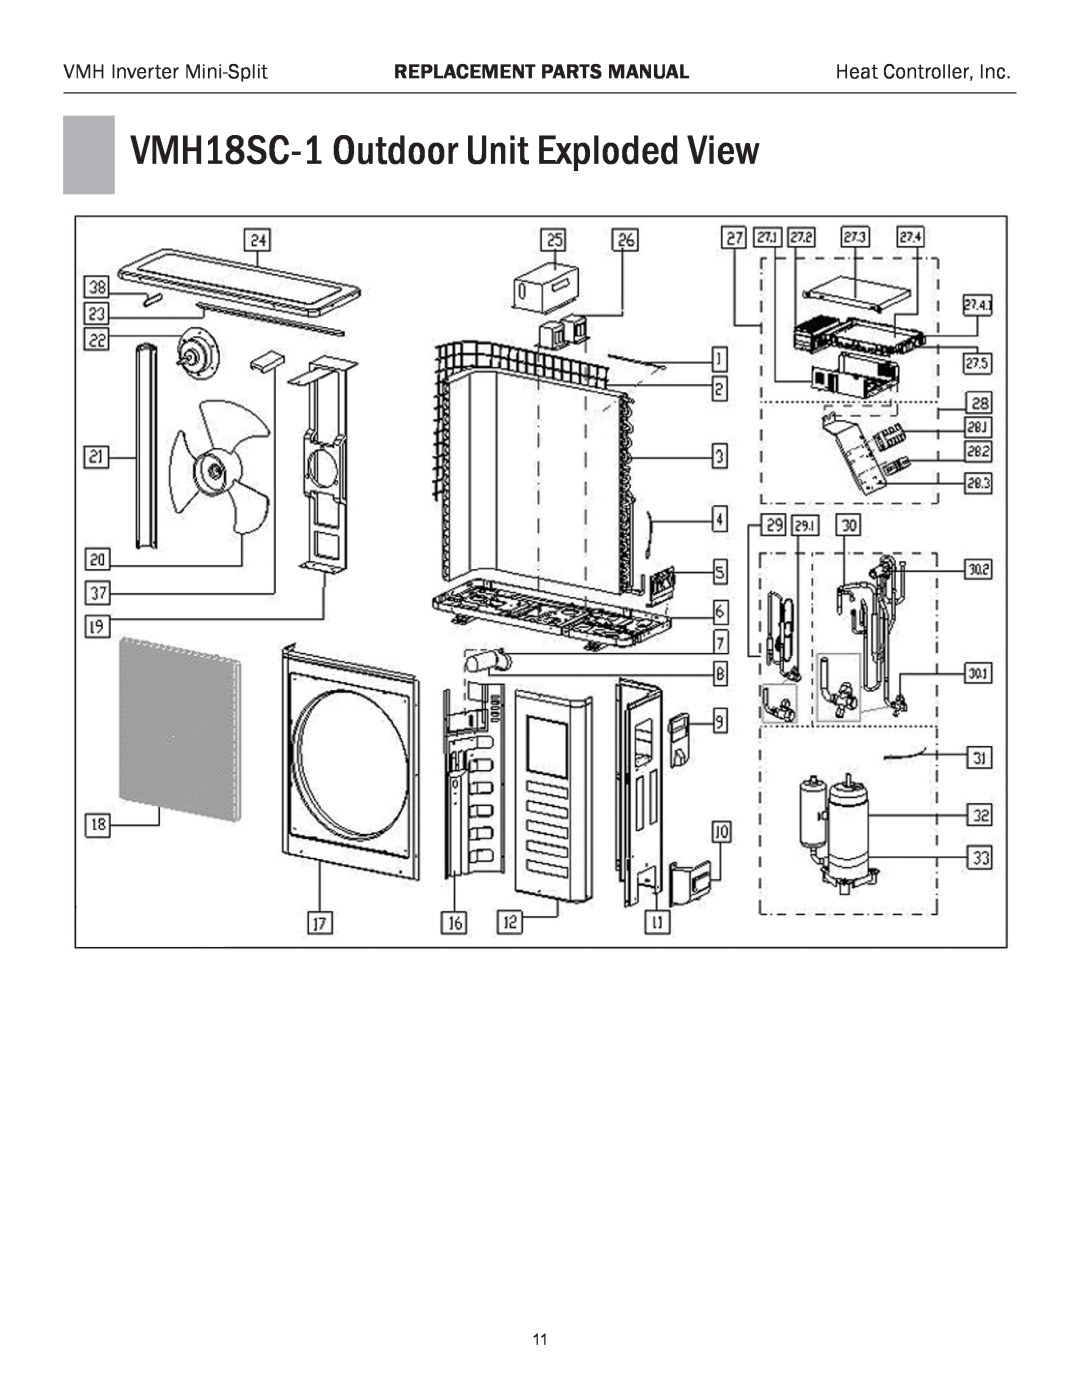 Heat Controller VMH 24 manual VMH18SC-1Outdoor Unit Exploded View, VMH Inverter Mini-Split, Replacement Parts Manual 